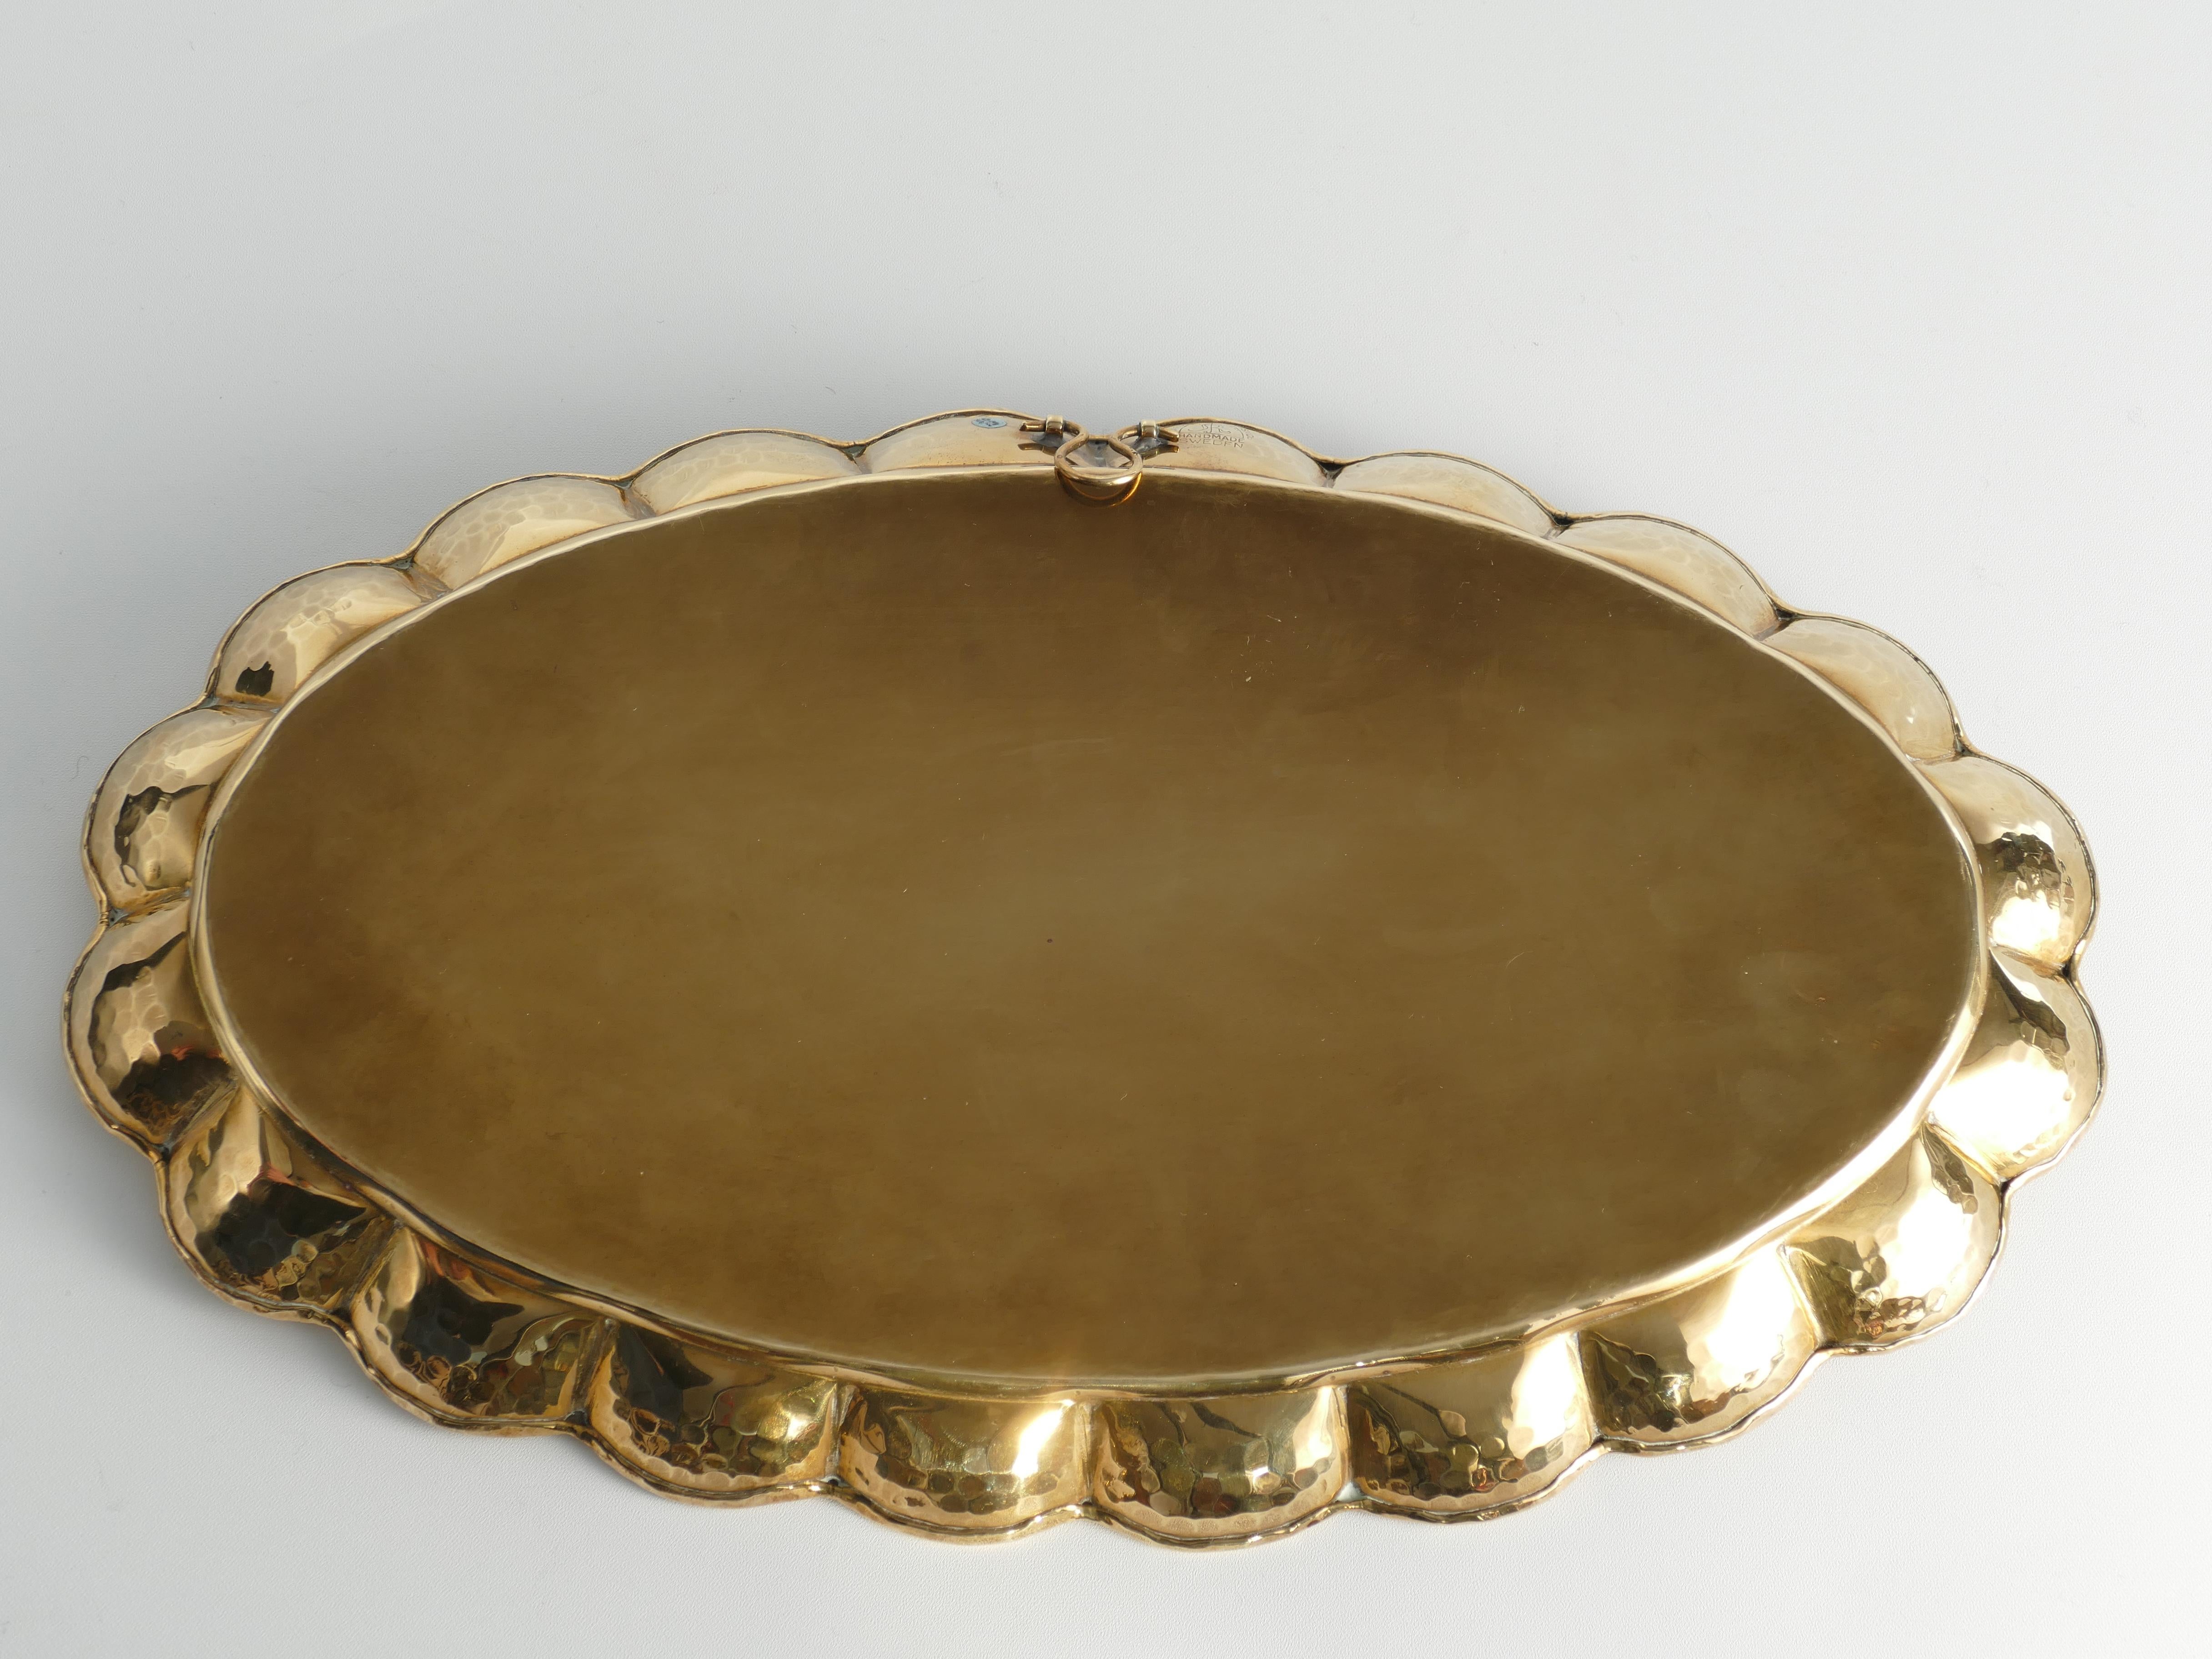 Mid-20th Century Hollywood Regency Oval Brass Tray by Karlstad Konstsmide, Sweden For Sale